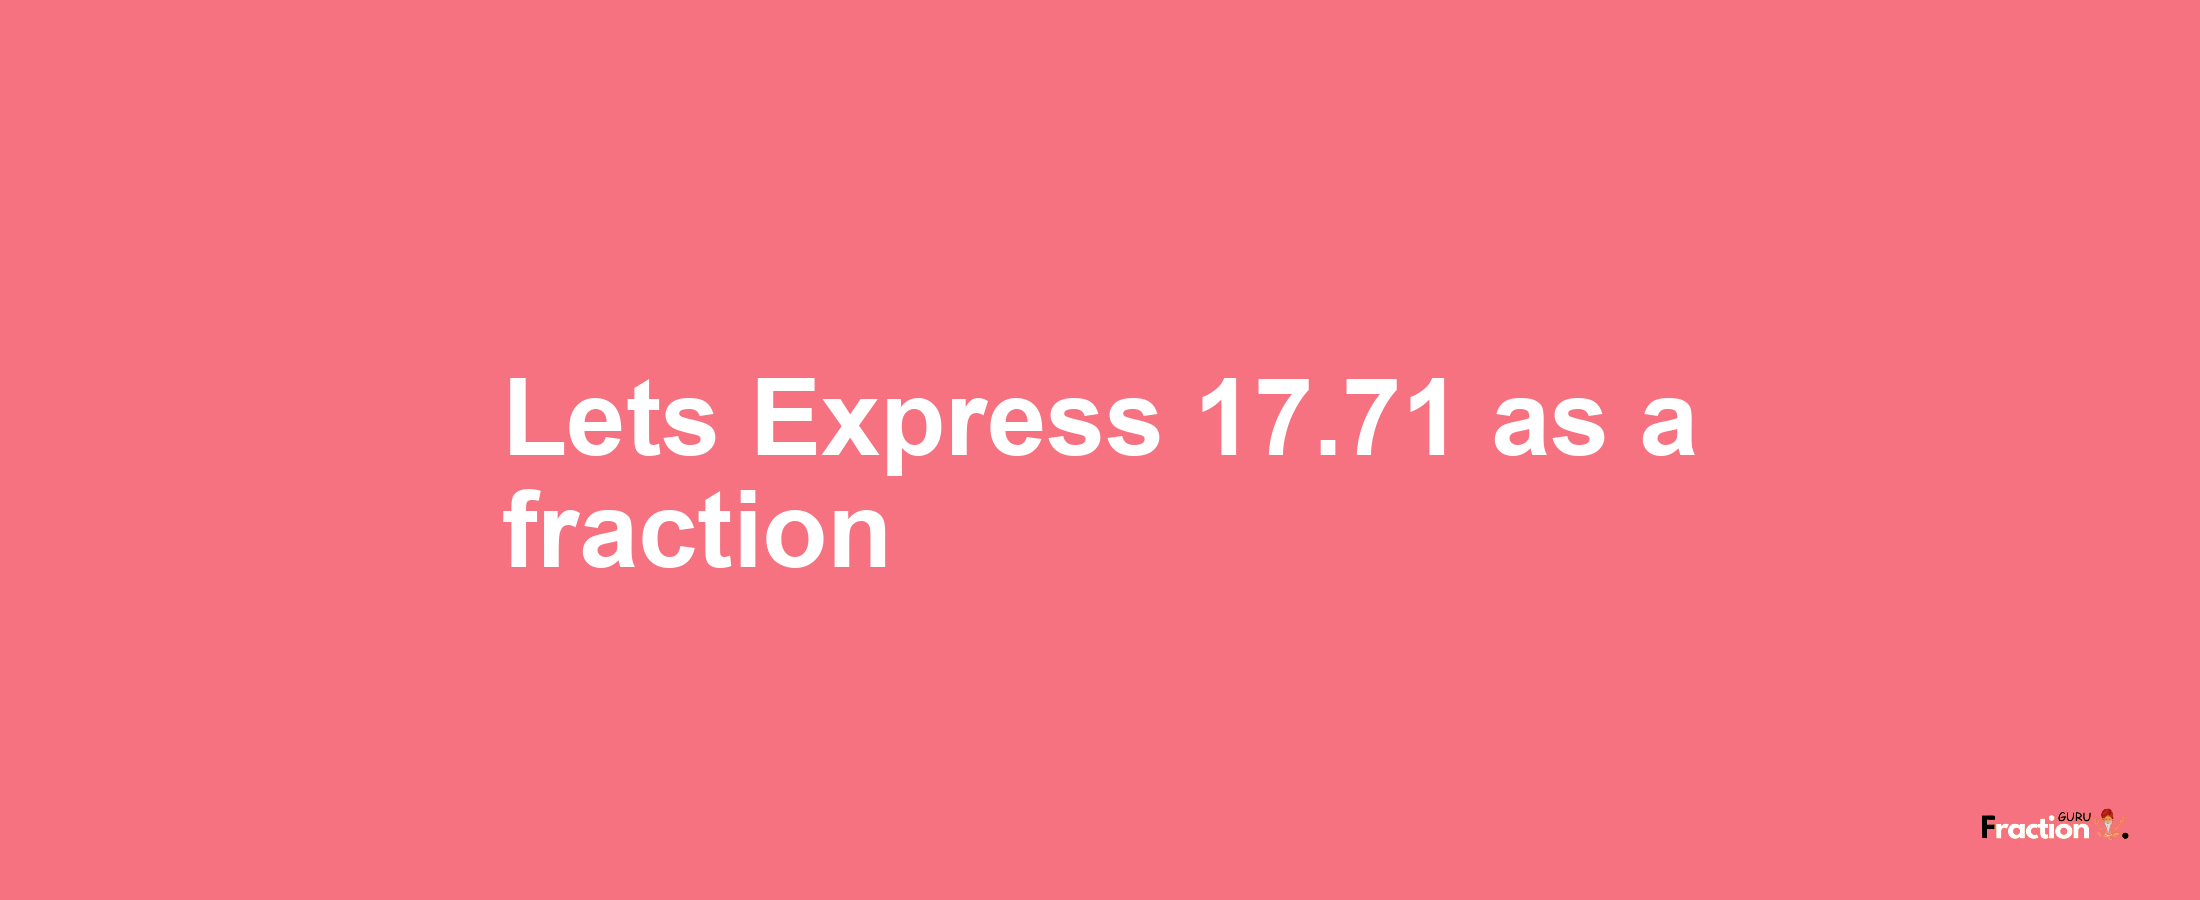 Lets Express 17.71 as afraction